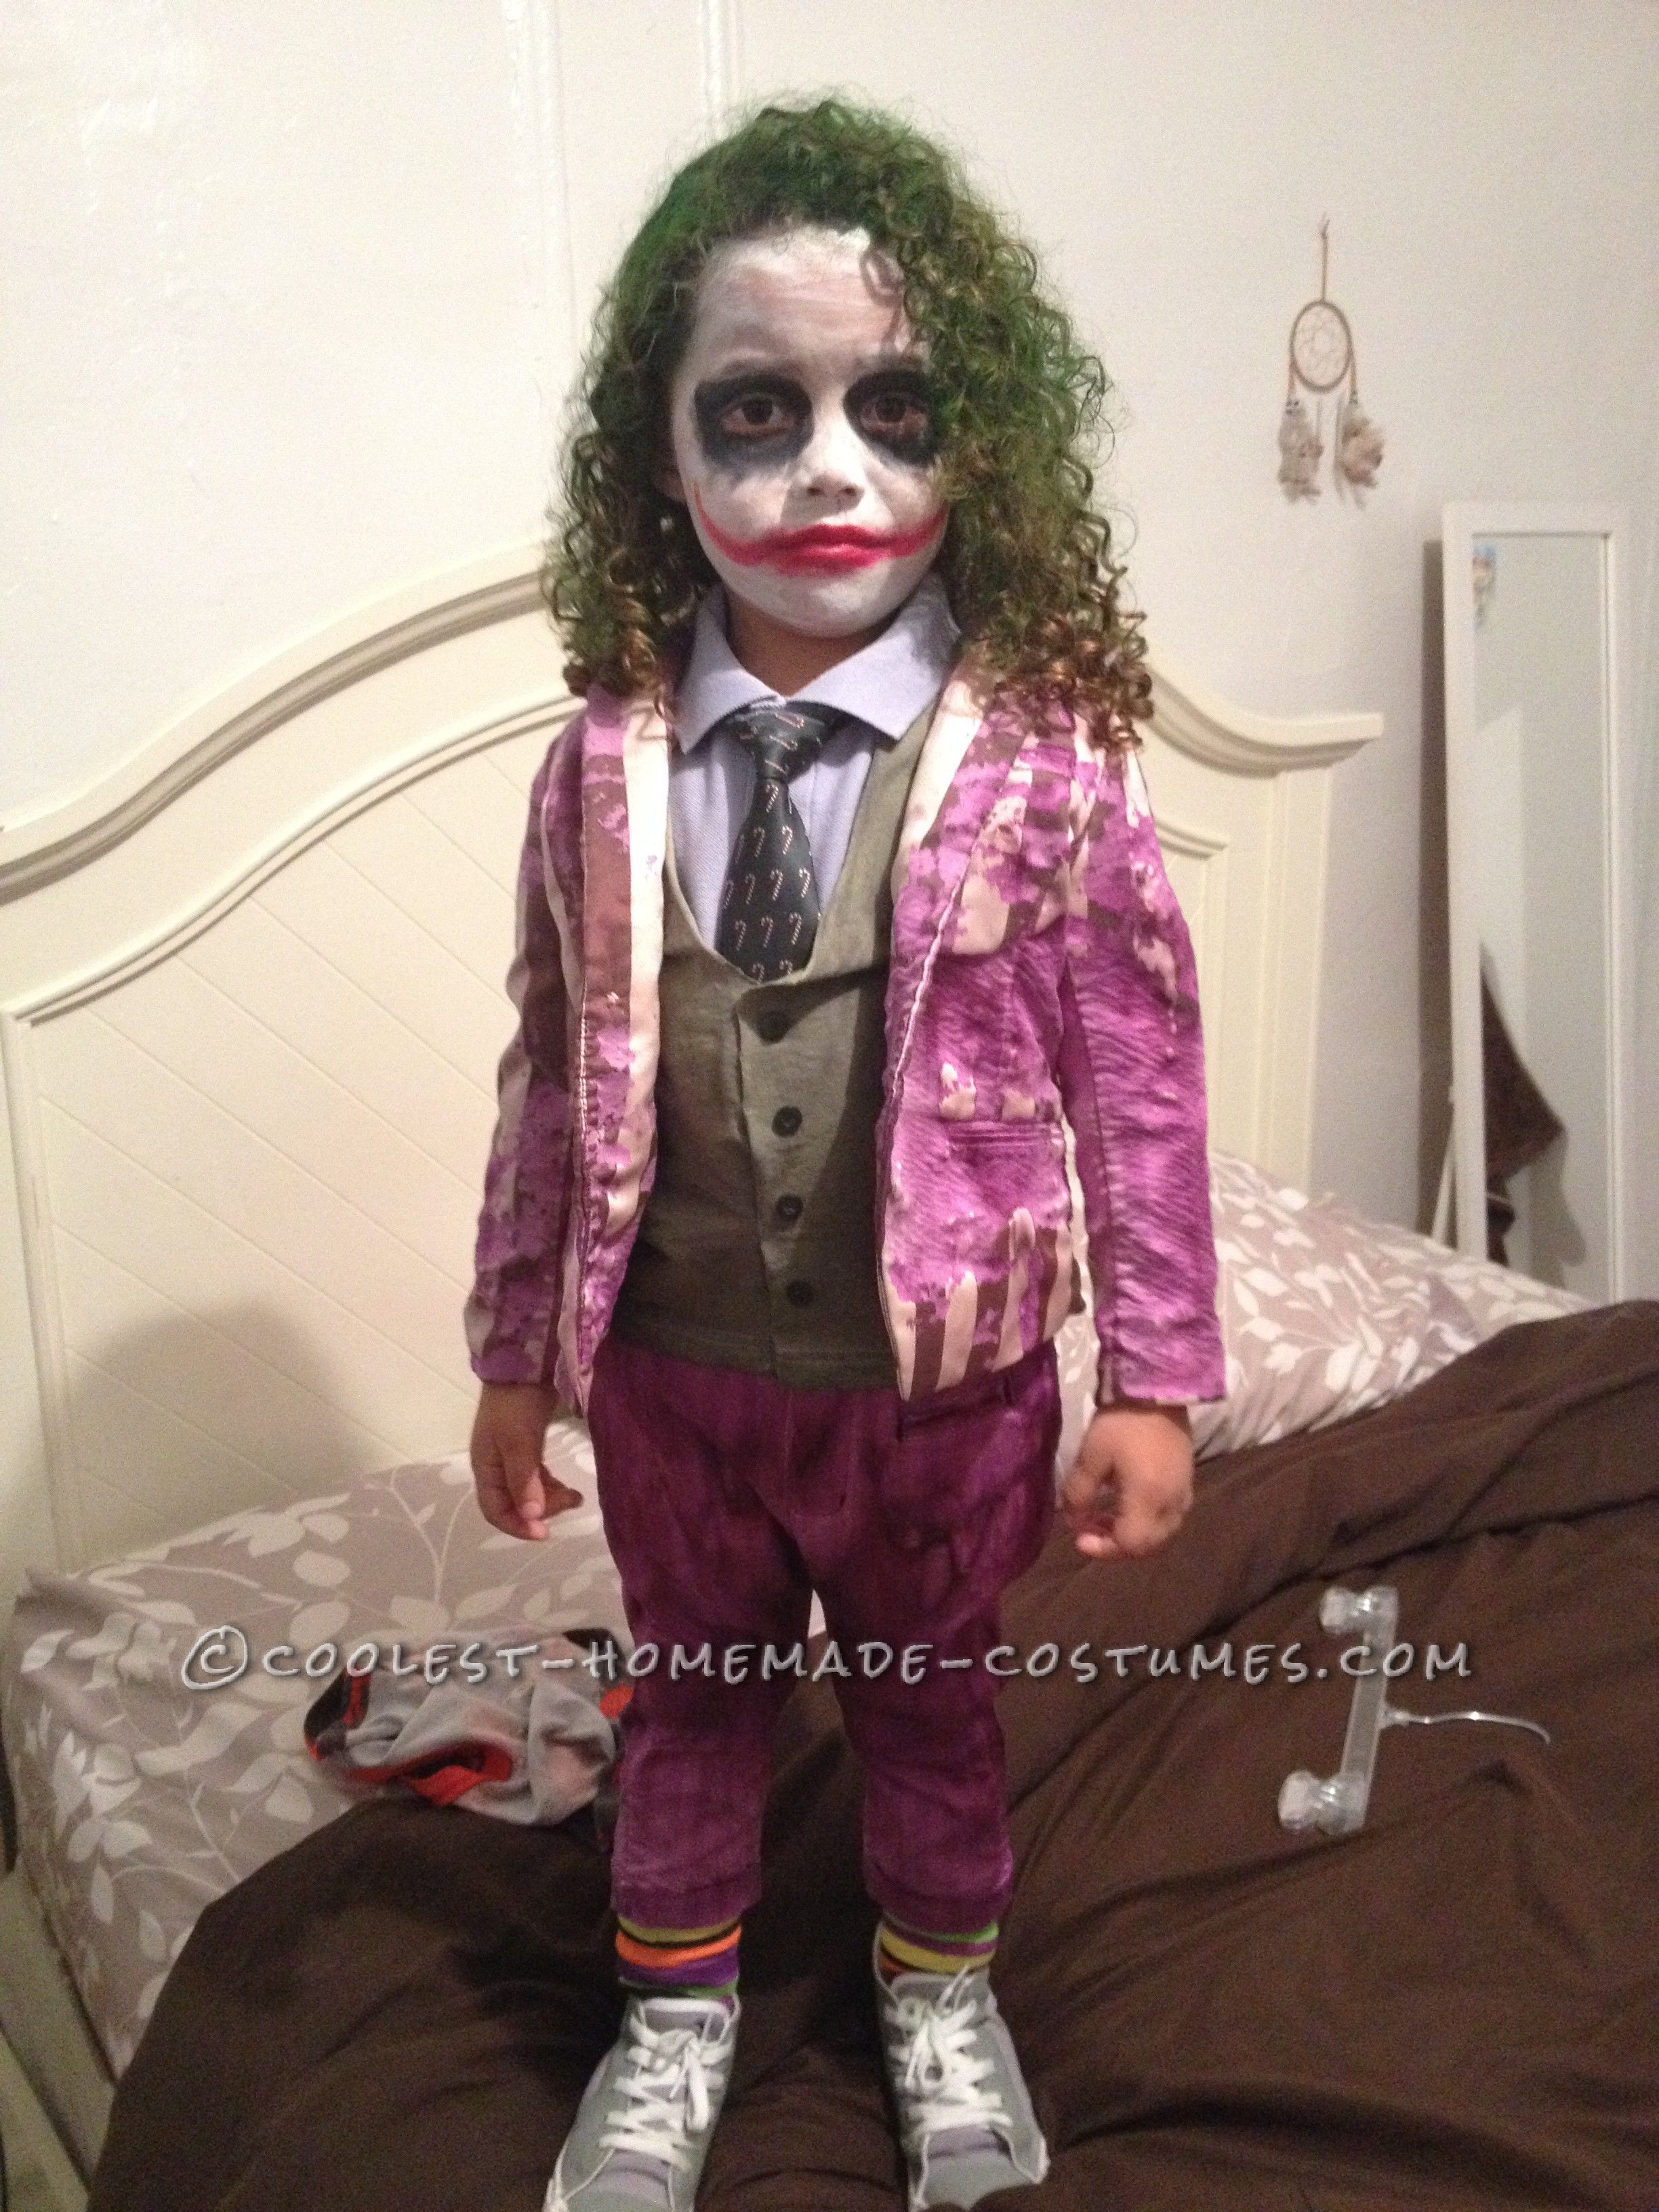 Creative DIY Costumes
 Creative and Unique Homemade Joker Costume for a Toddler